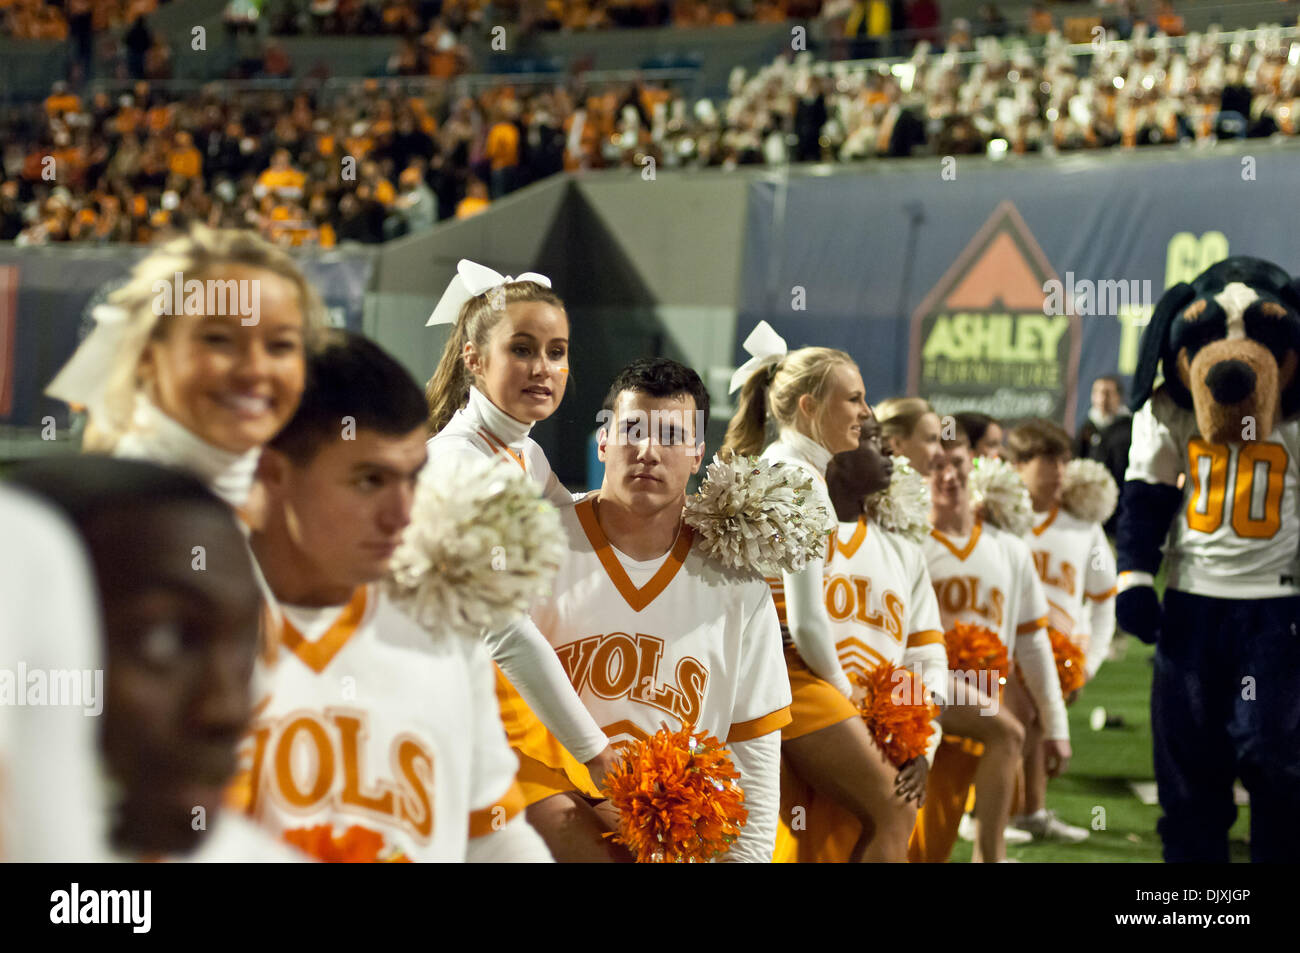 Nov. 6, 2010 - St. Louis, Tennessee, United States of America - The Tennessee Volunteers Cheerleaders sit on the sidelines during an injury timeout late in the second half of playduring the NCAA regular season game between the University of Tennessee Volunteers at University of Memphis Tigers at Liberty Bowl Memorial Stadium. Volunteers defeats the Tigers 50 - 14 at the Final. (Cre Stock Photo